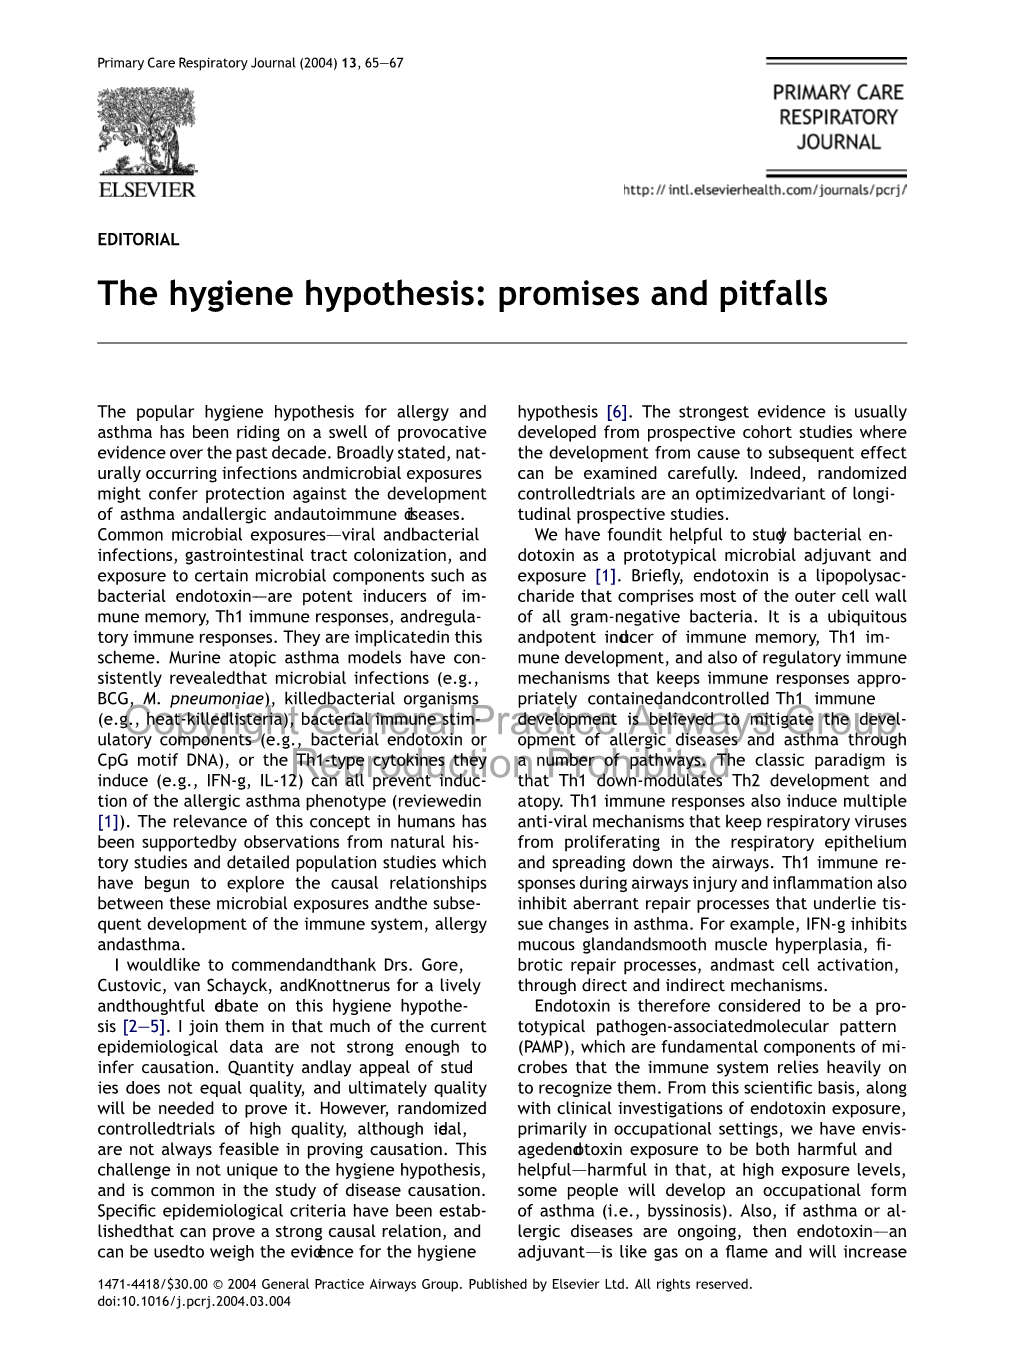 The Hygiene Hypothesis: Promises and Pitfalls